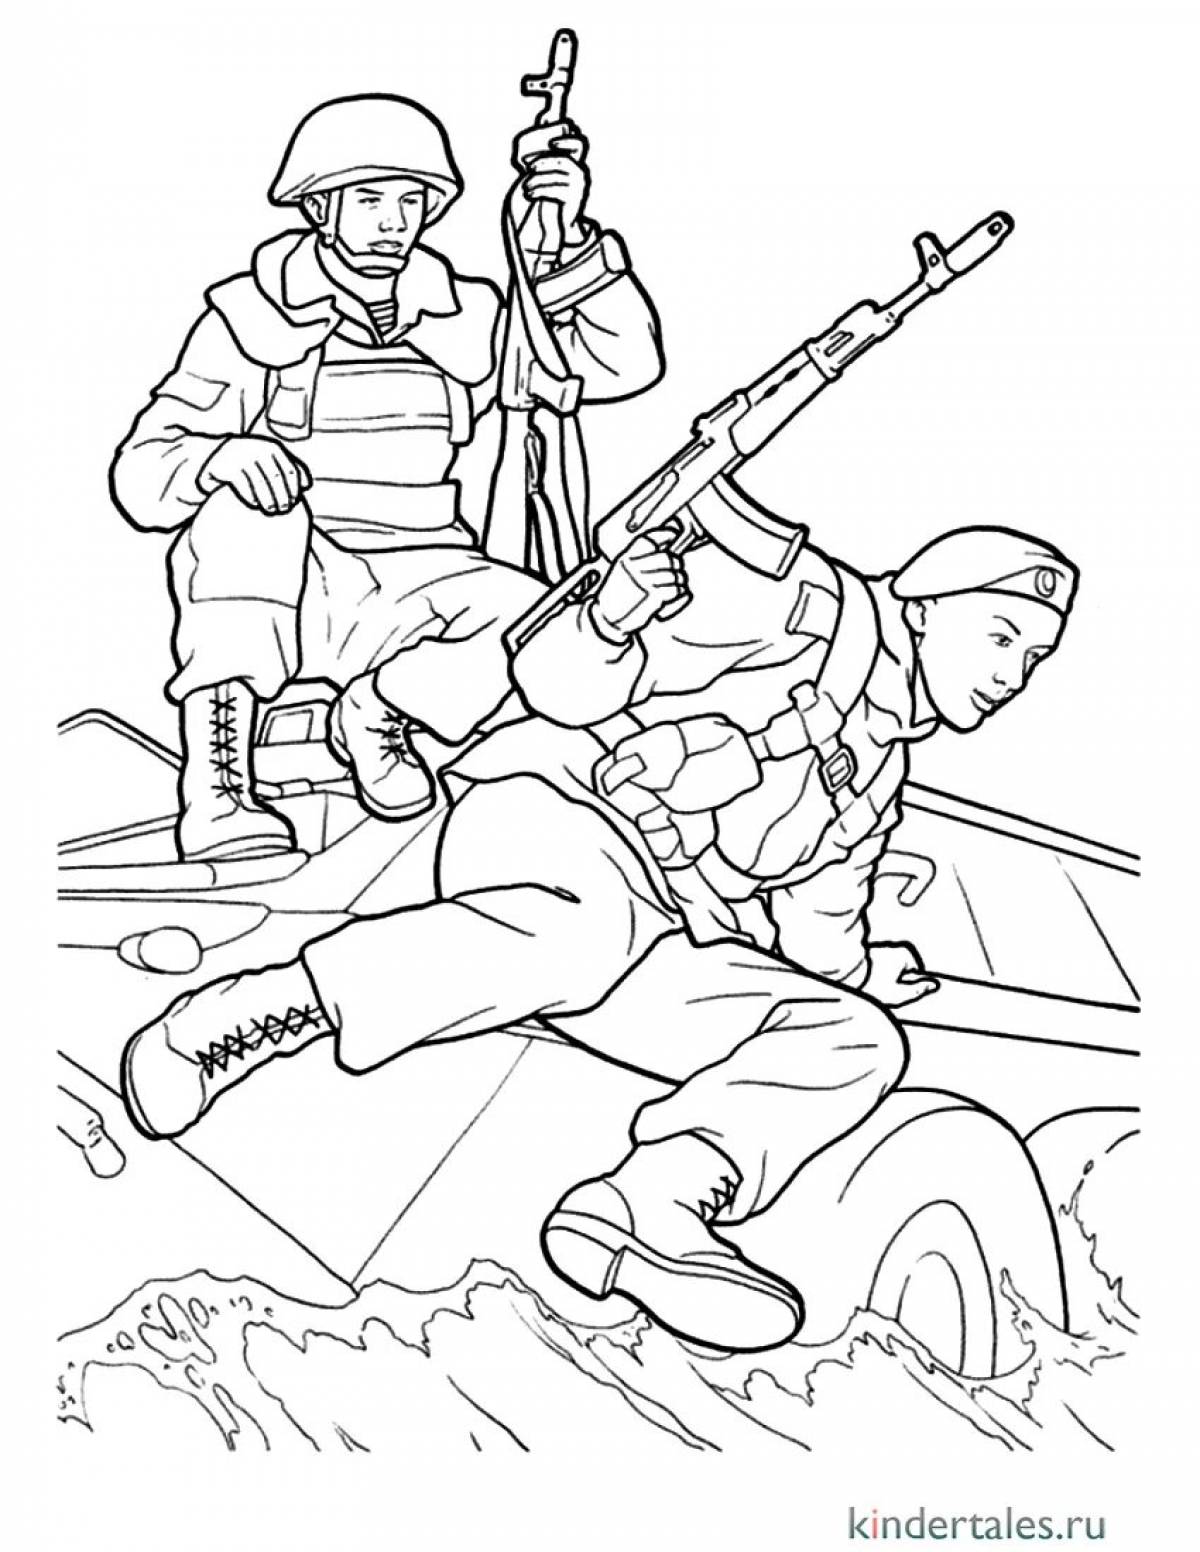 Colorful drawing of our country coloring page